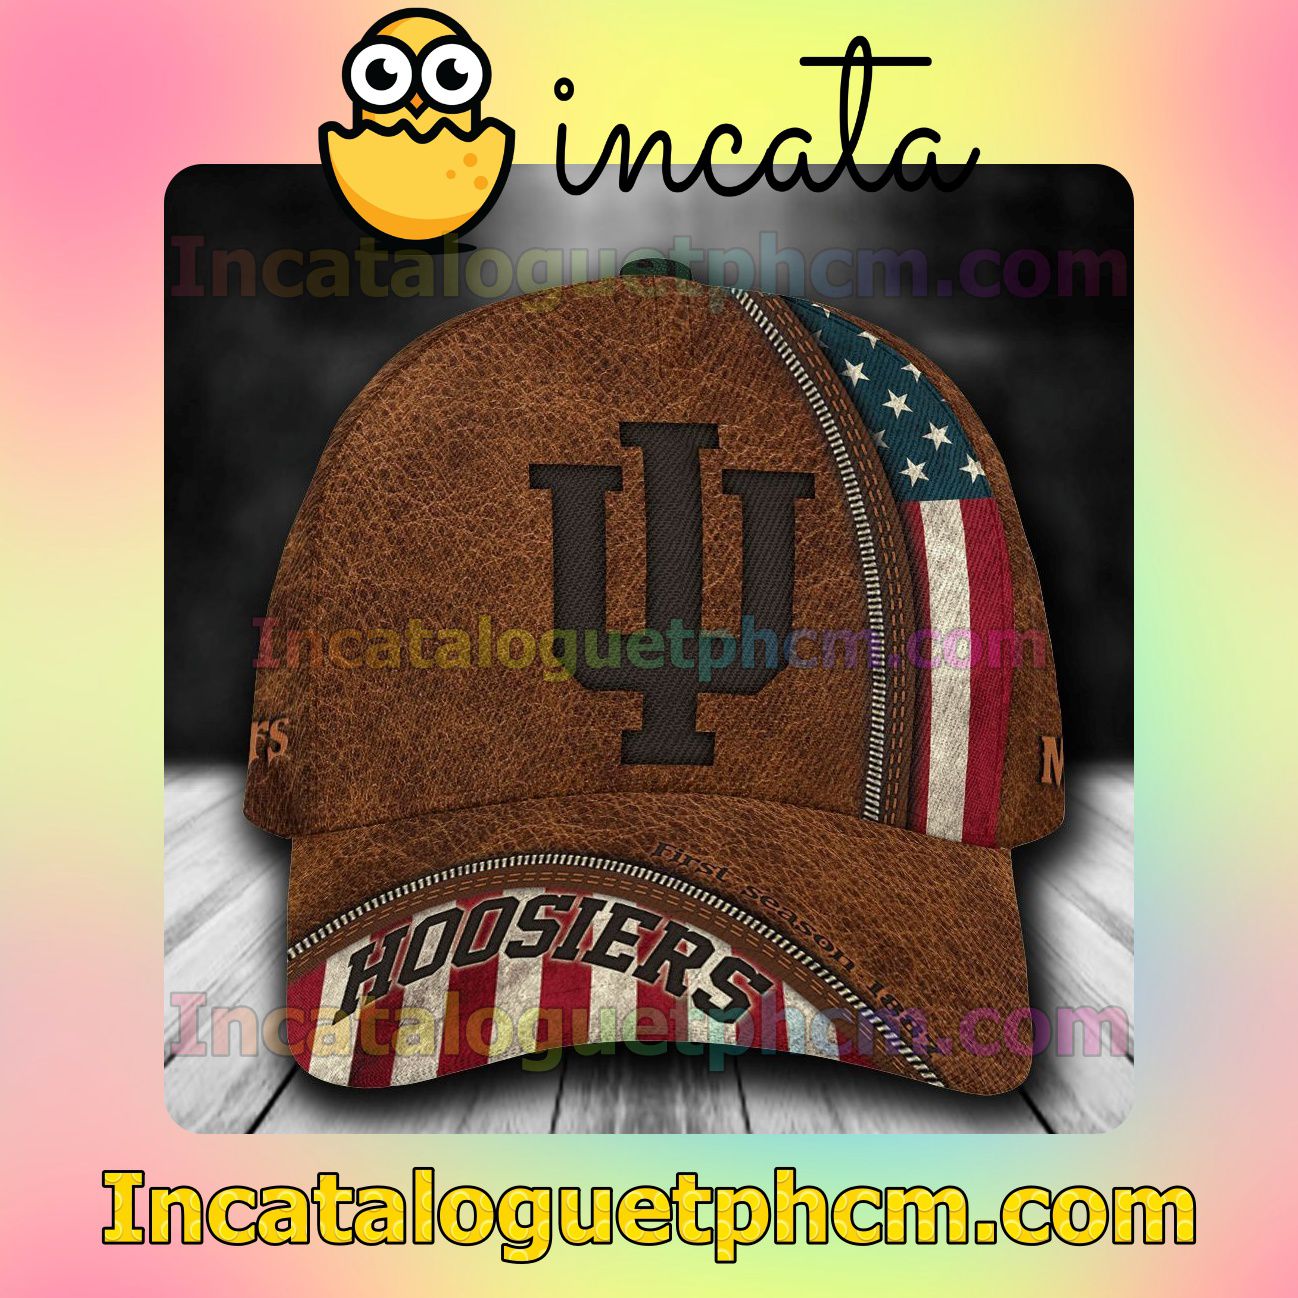 Sale Off Indiana Hoosiers Leather Zipper Print Customized Hat Caps